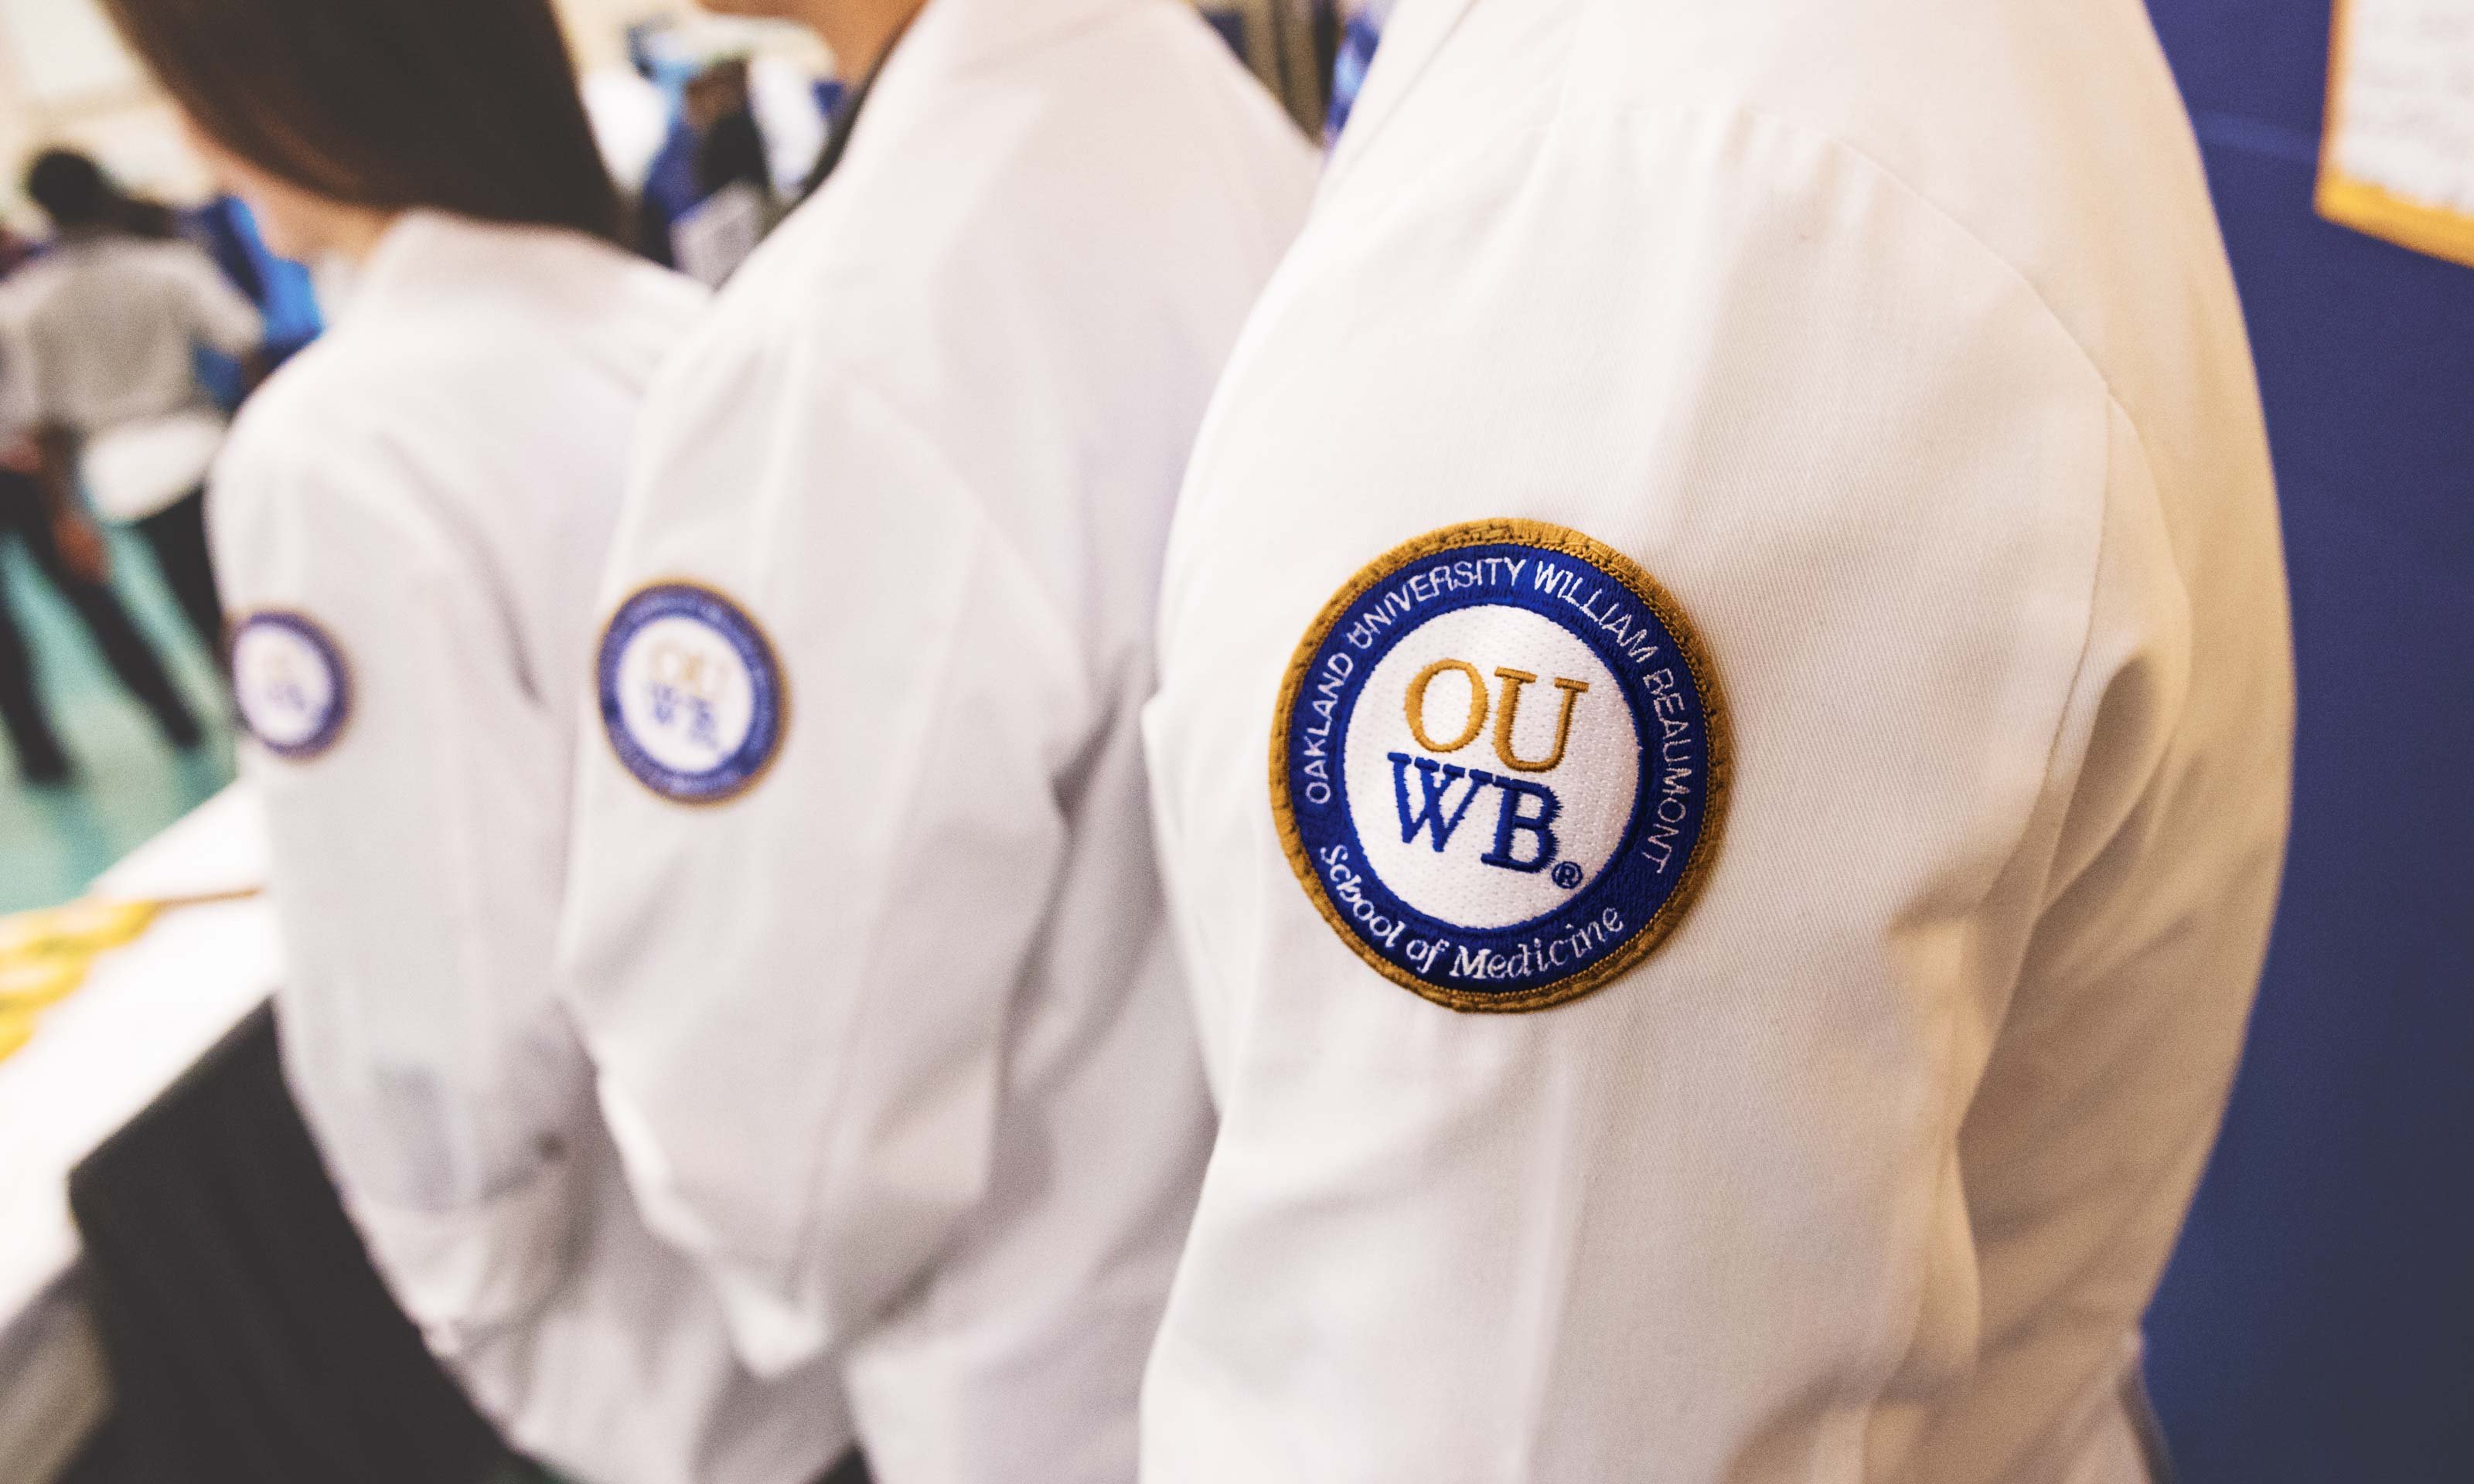 O U W B students in white coats. The O U W B logo crest is in the front of the photo, on the white coats.